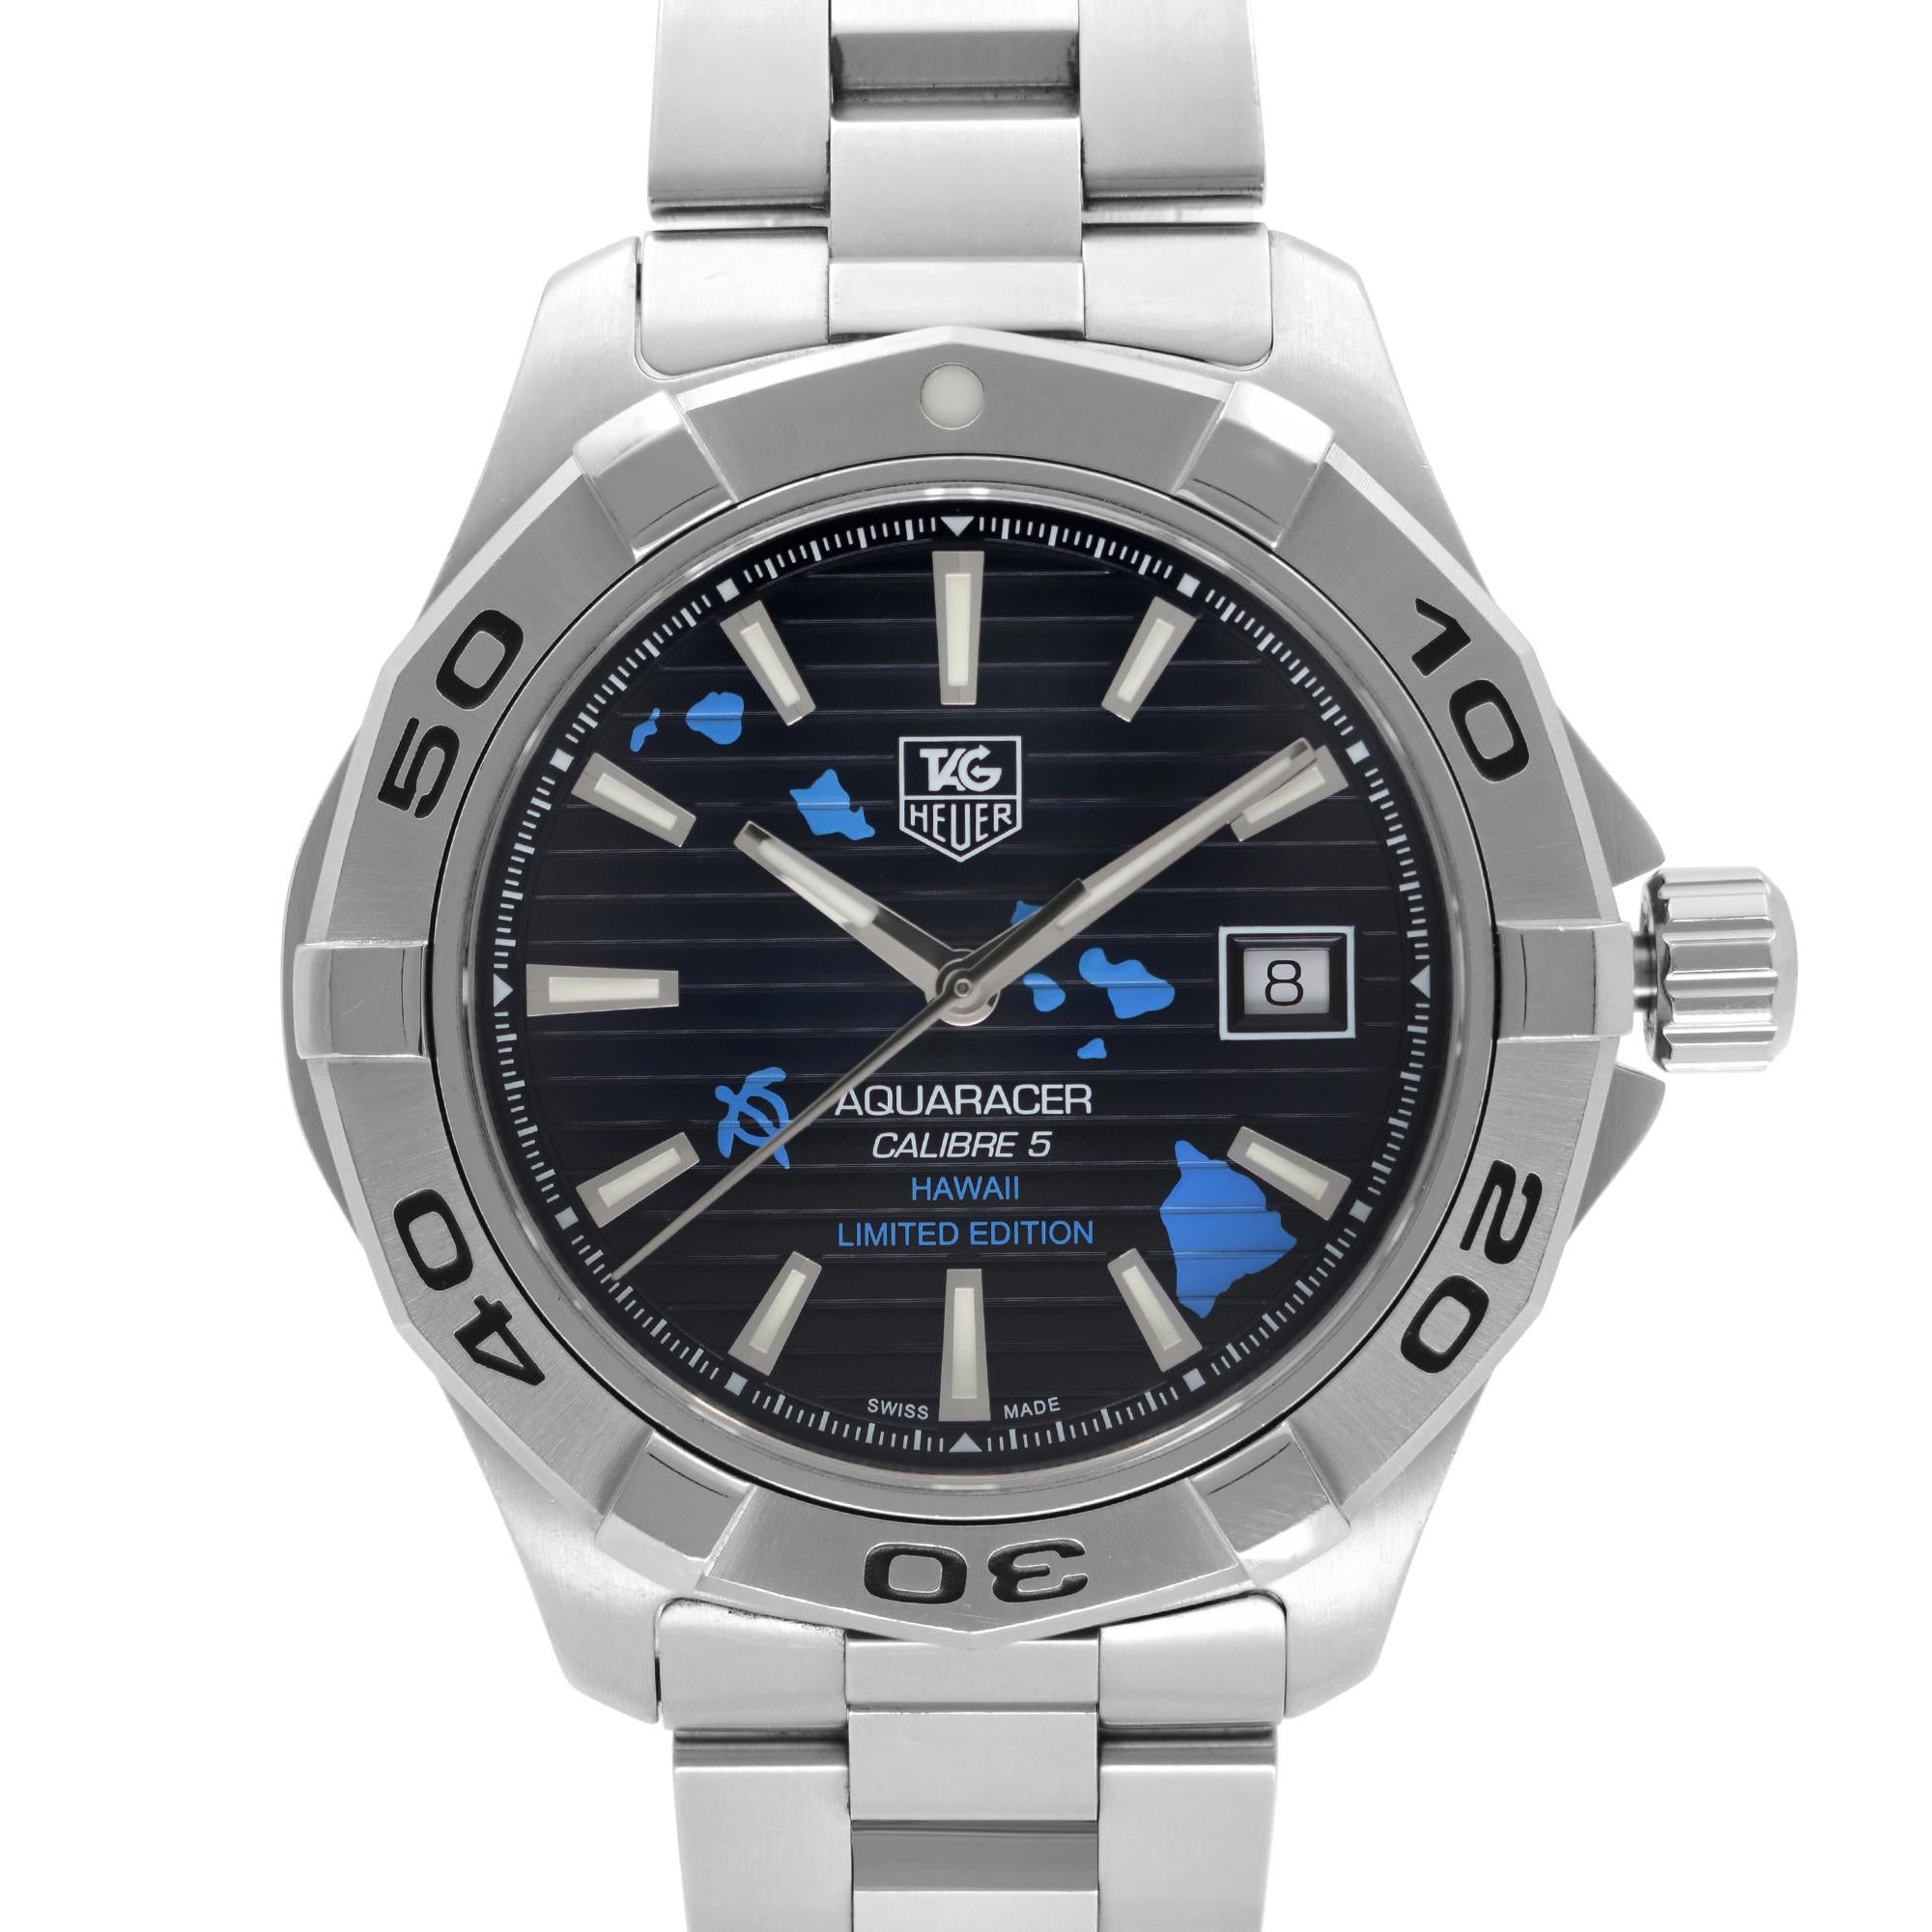 Pre-owned TAG Heuer Aquaracer Hawaii Limited Edition Automatic Men's Watch WAP201AA.BA0830.  Round Brushed and Polished Stainless Steel Case on a Brushed Stainless Steel Bracelet. Blue Sunray dial with Horizontal Lines and a Special Light Blue